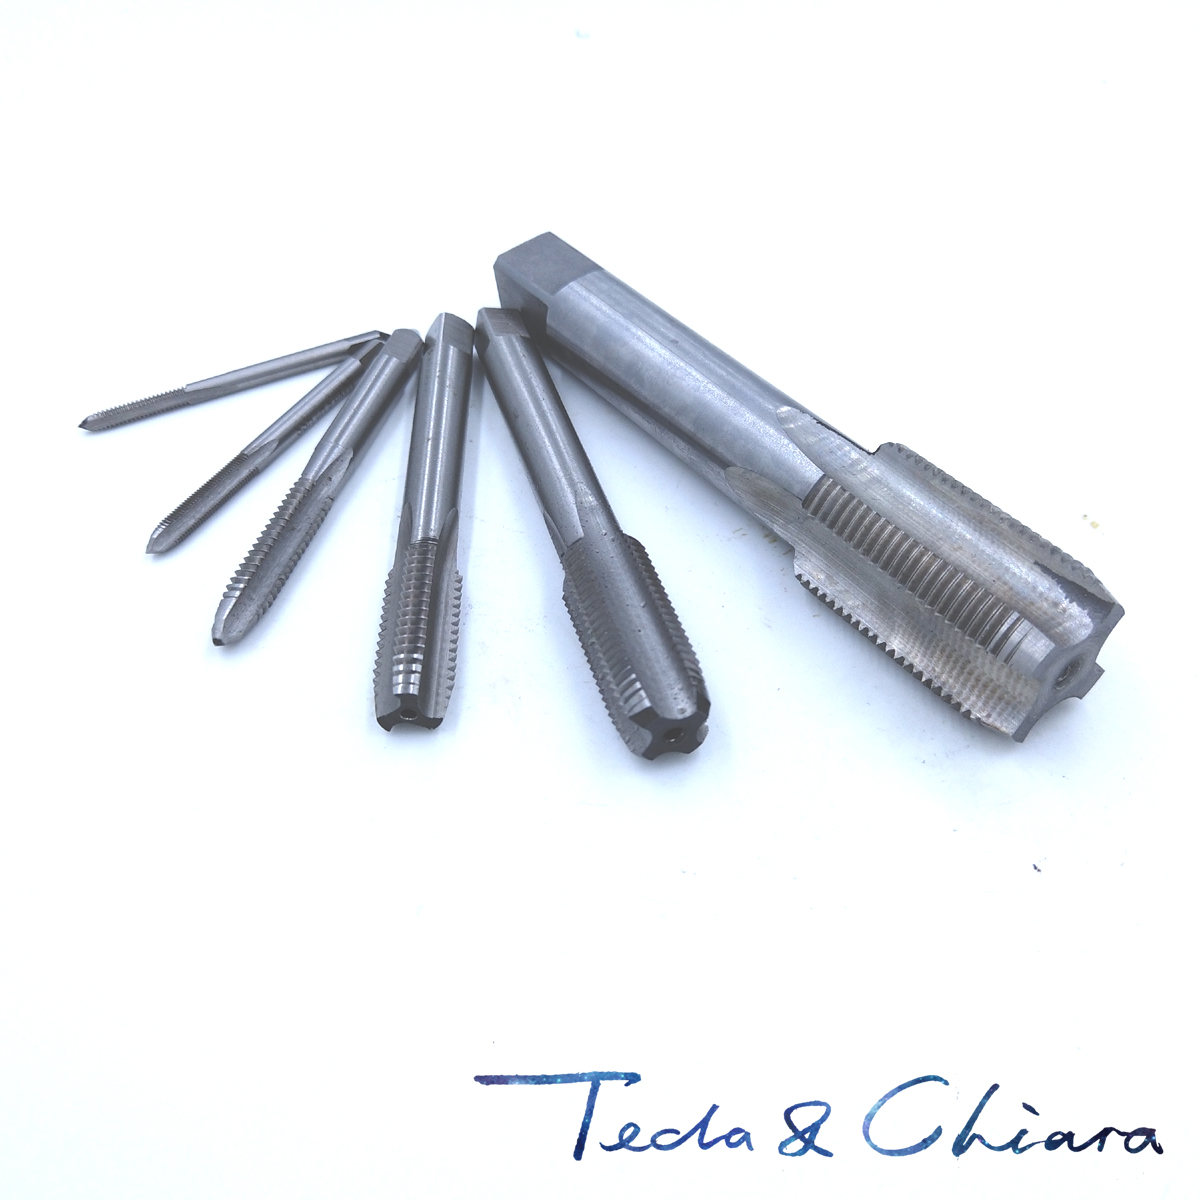 1Pc M15 X 0.5mm 0.75mm 1mm 1.25mm 1.5mm 2mm Metric HSS Right Hand Tap Threading Tools For Mold Machining * 0.5 0.75 1 1.25 1.5 2